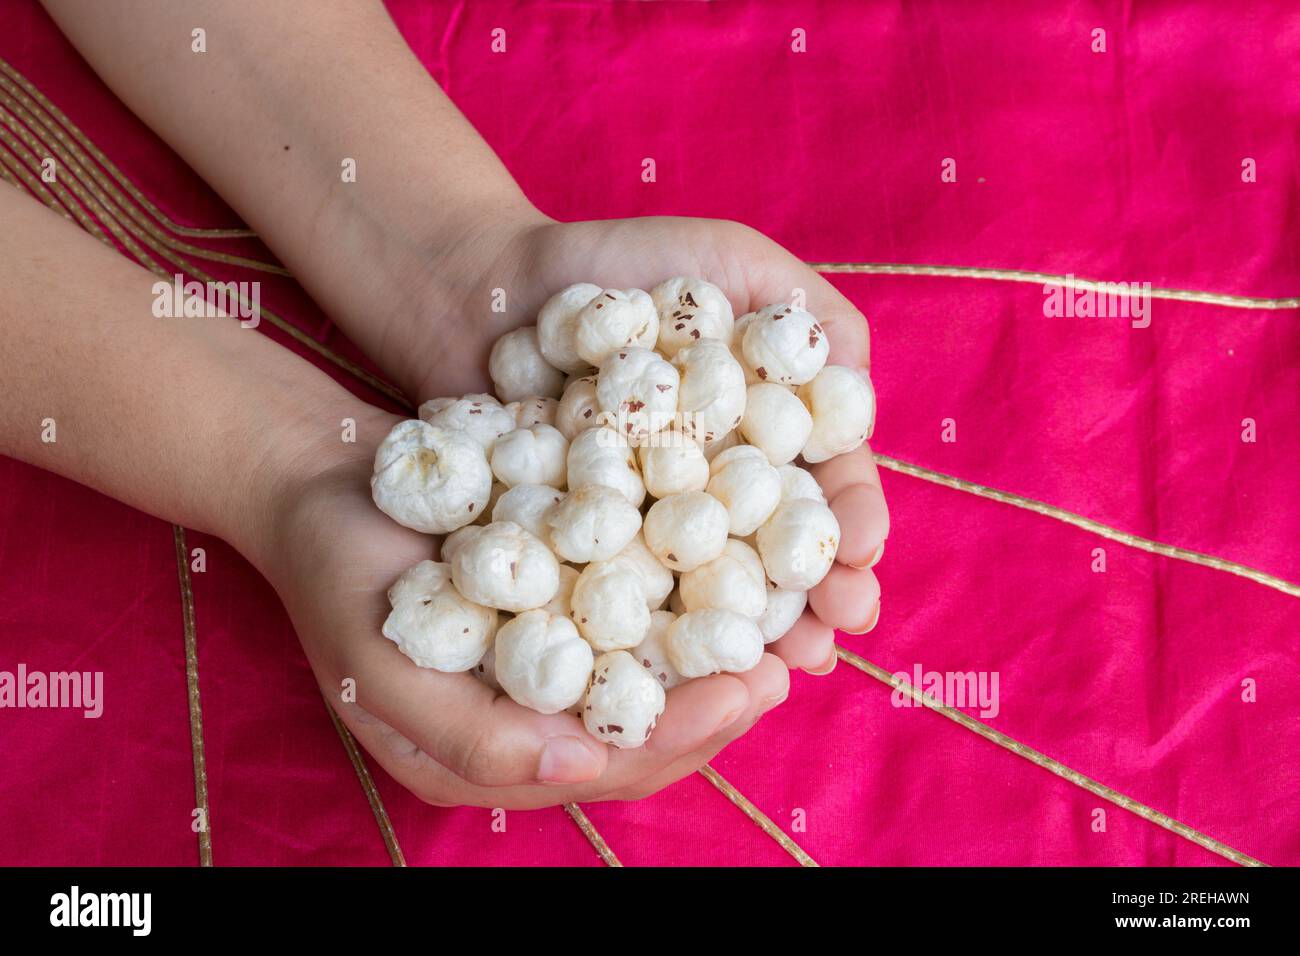 Makhana or foxnut in hand with pink background Stock Photo